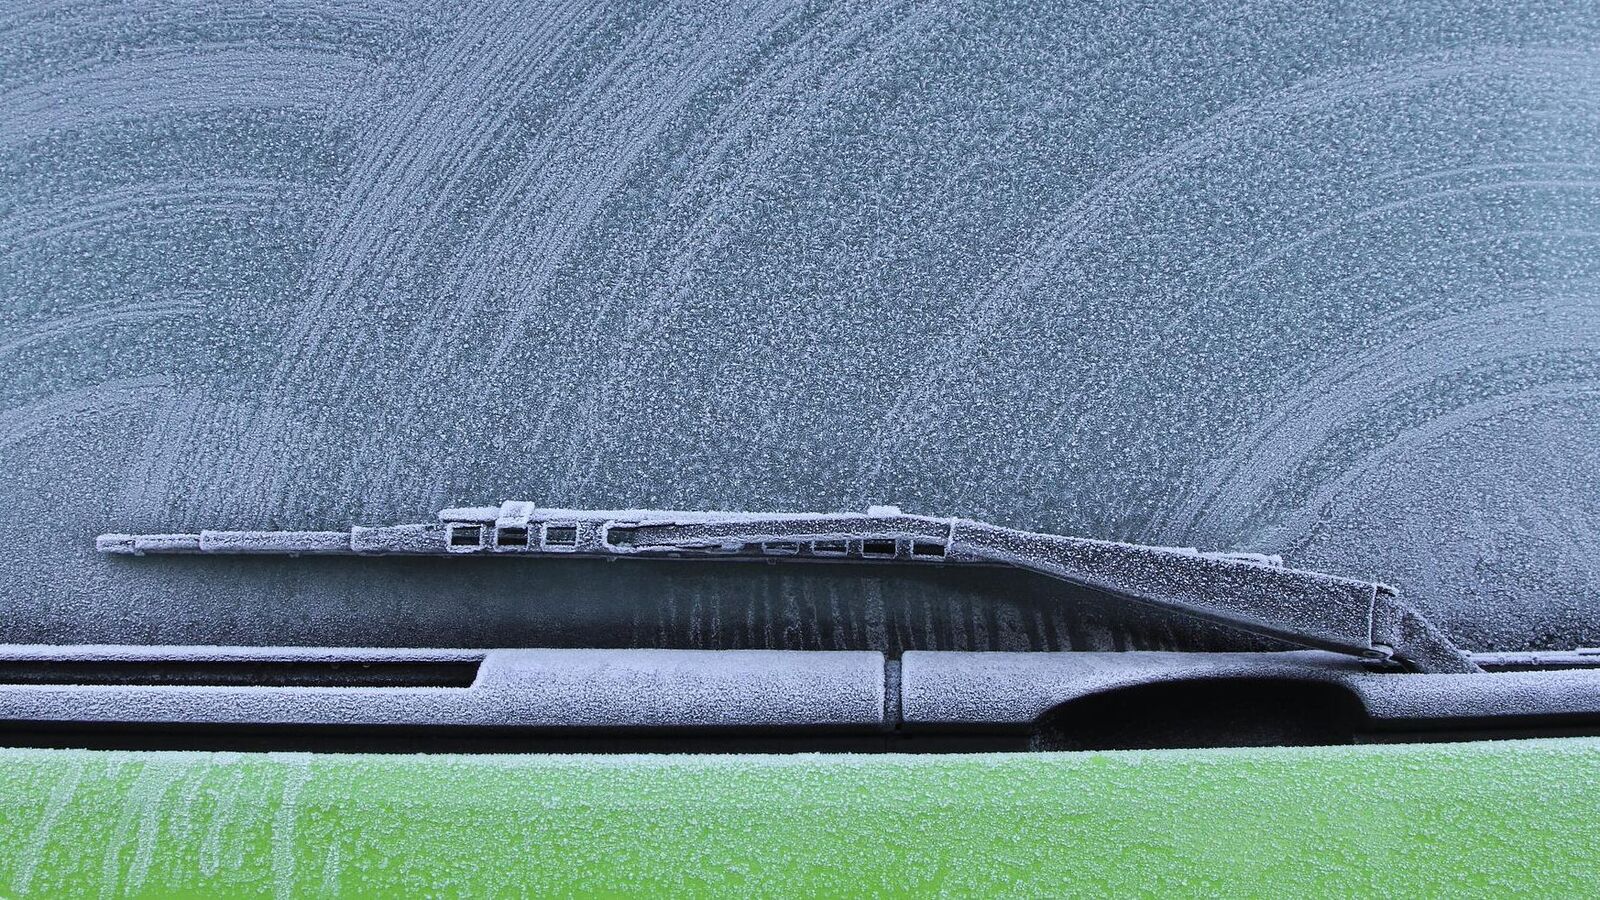 Tips to Defog Your Windshield in Warm and Cold Temperatures